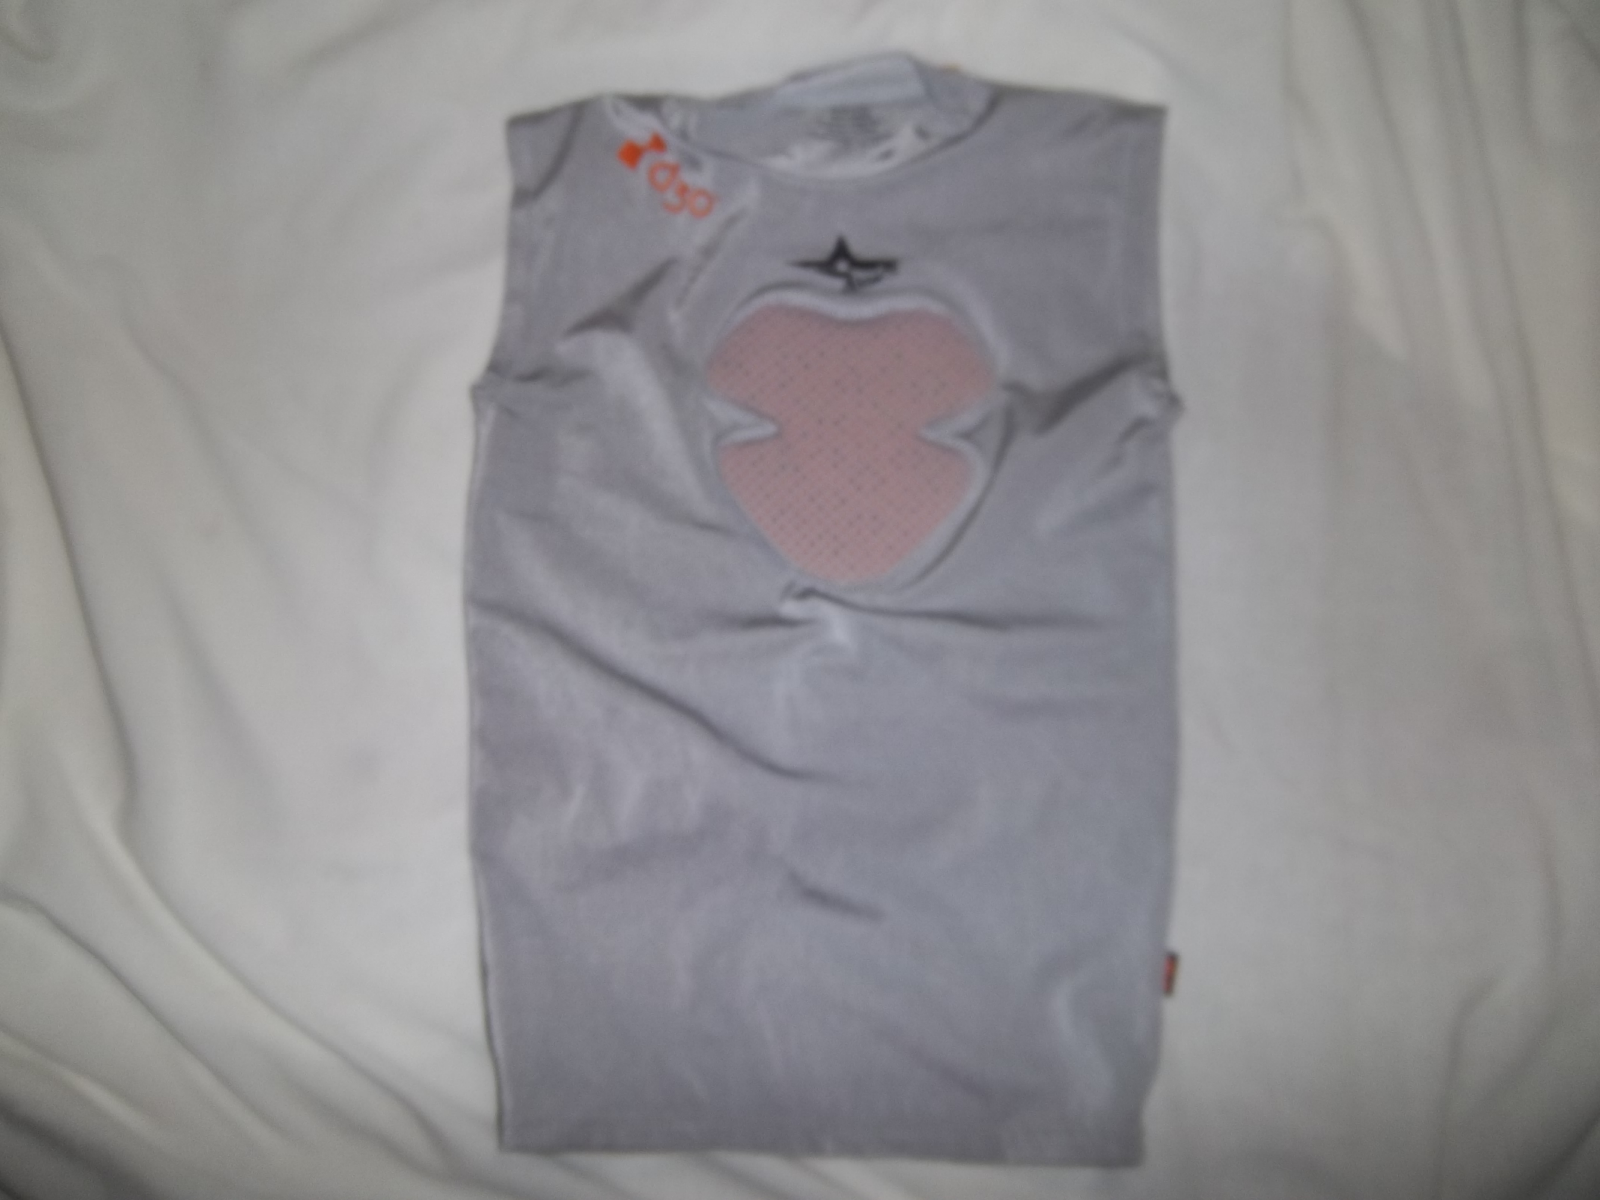 ALL-STAR D30  HEART SHIED GREY YOUTH LARGE/X-LARGE